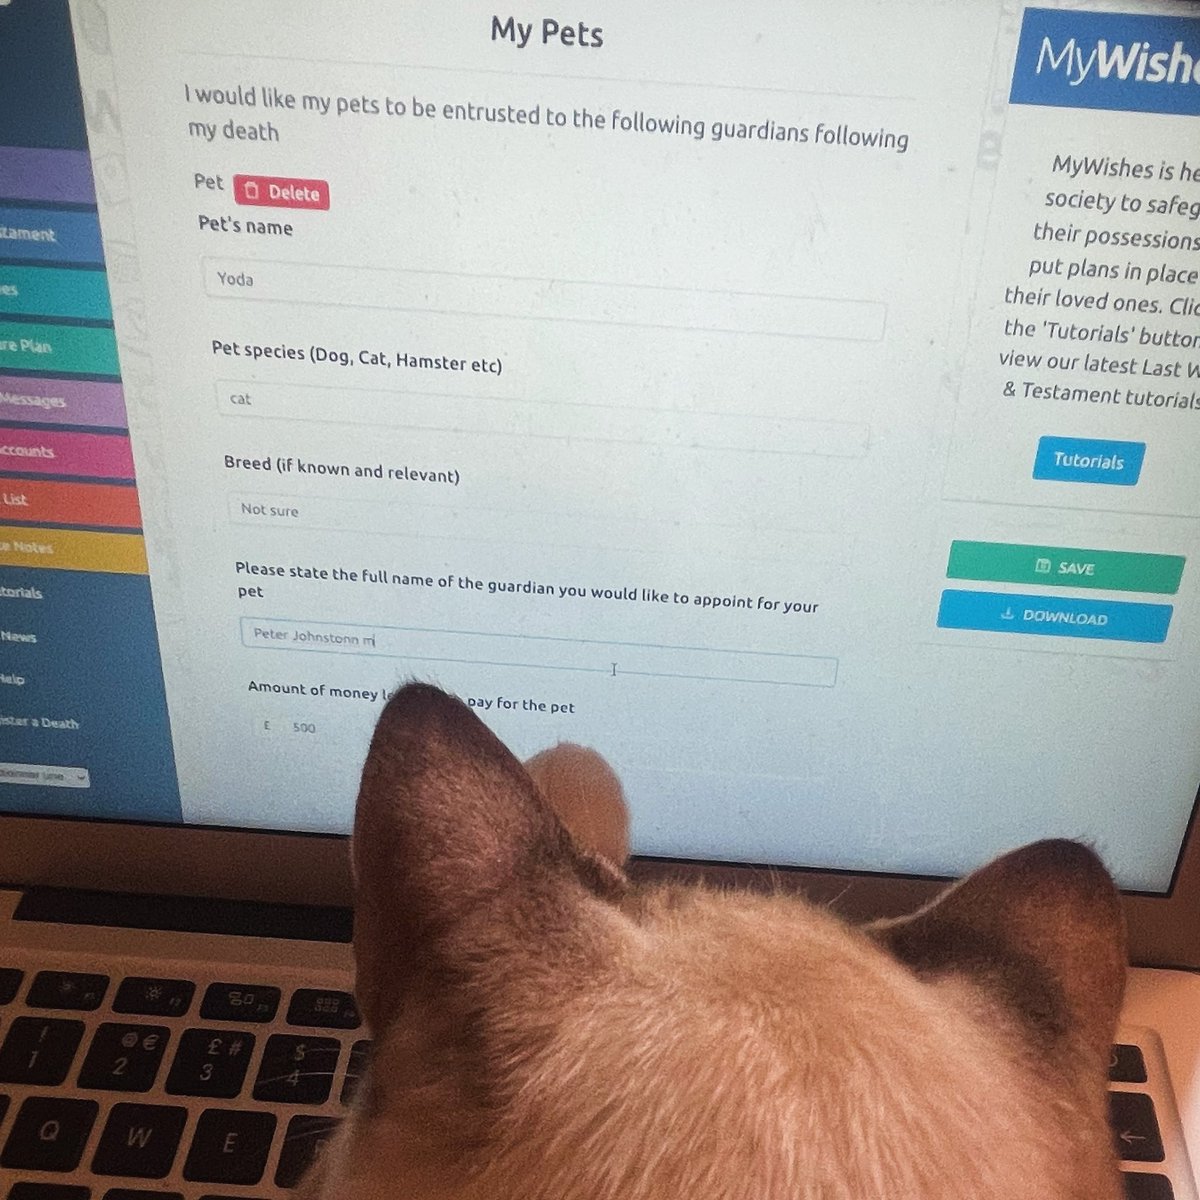 Don’t forget to make plans for your pets in your Last Will & Testament. To write a free, legally binding will visit: mywishes.co.uk/will-writing-s… #freewills #Freewillmonth #lifehack #pets #catsoftwitter